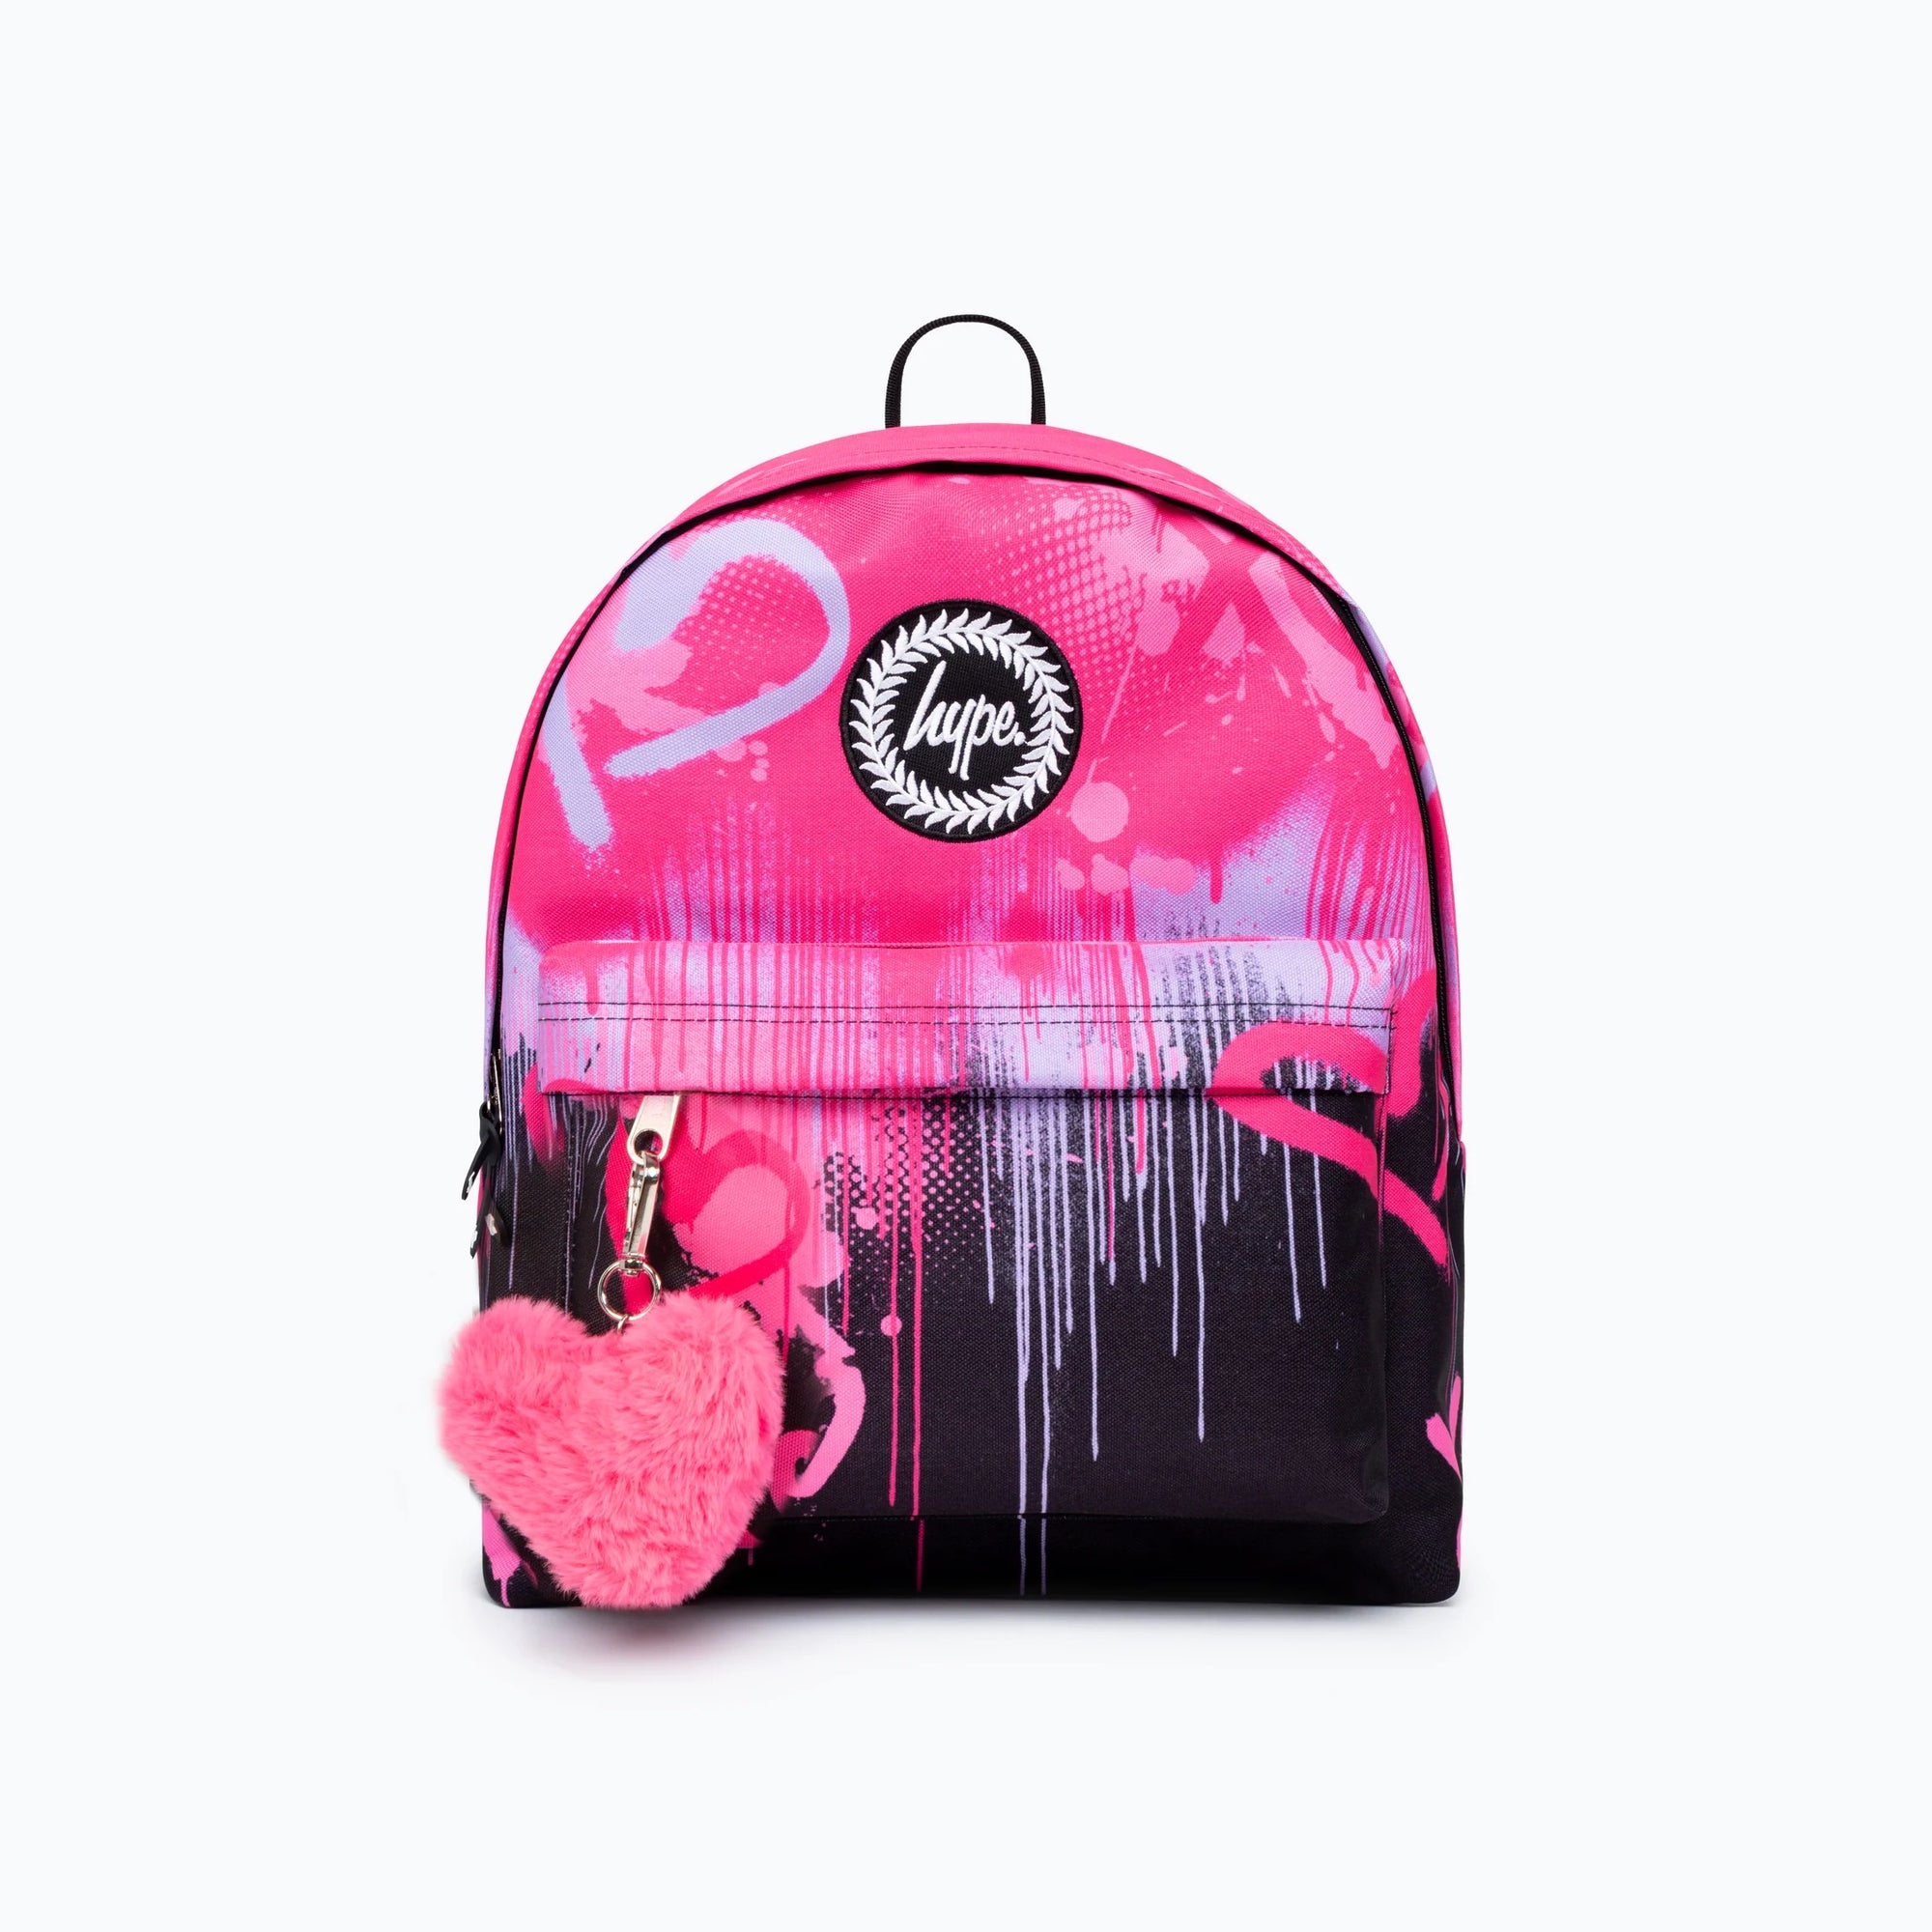 Hype Pink Heart Drips Backpack Xucb-054 Accessories ONE SIZE / Pink